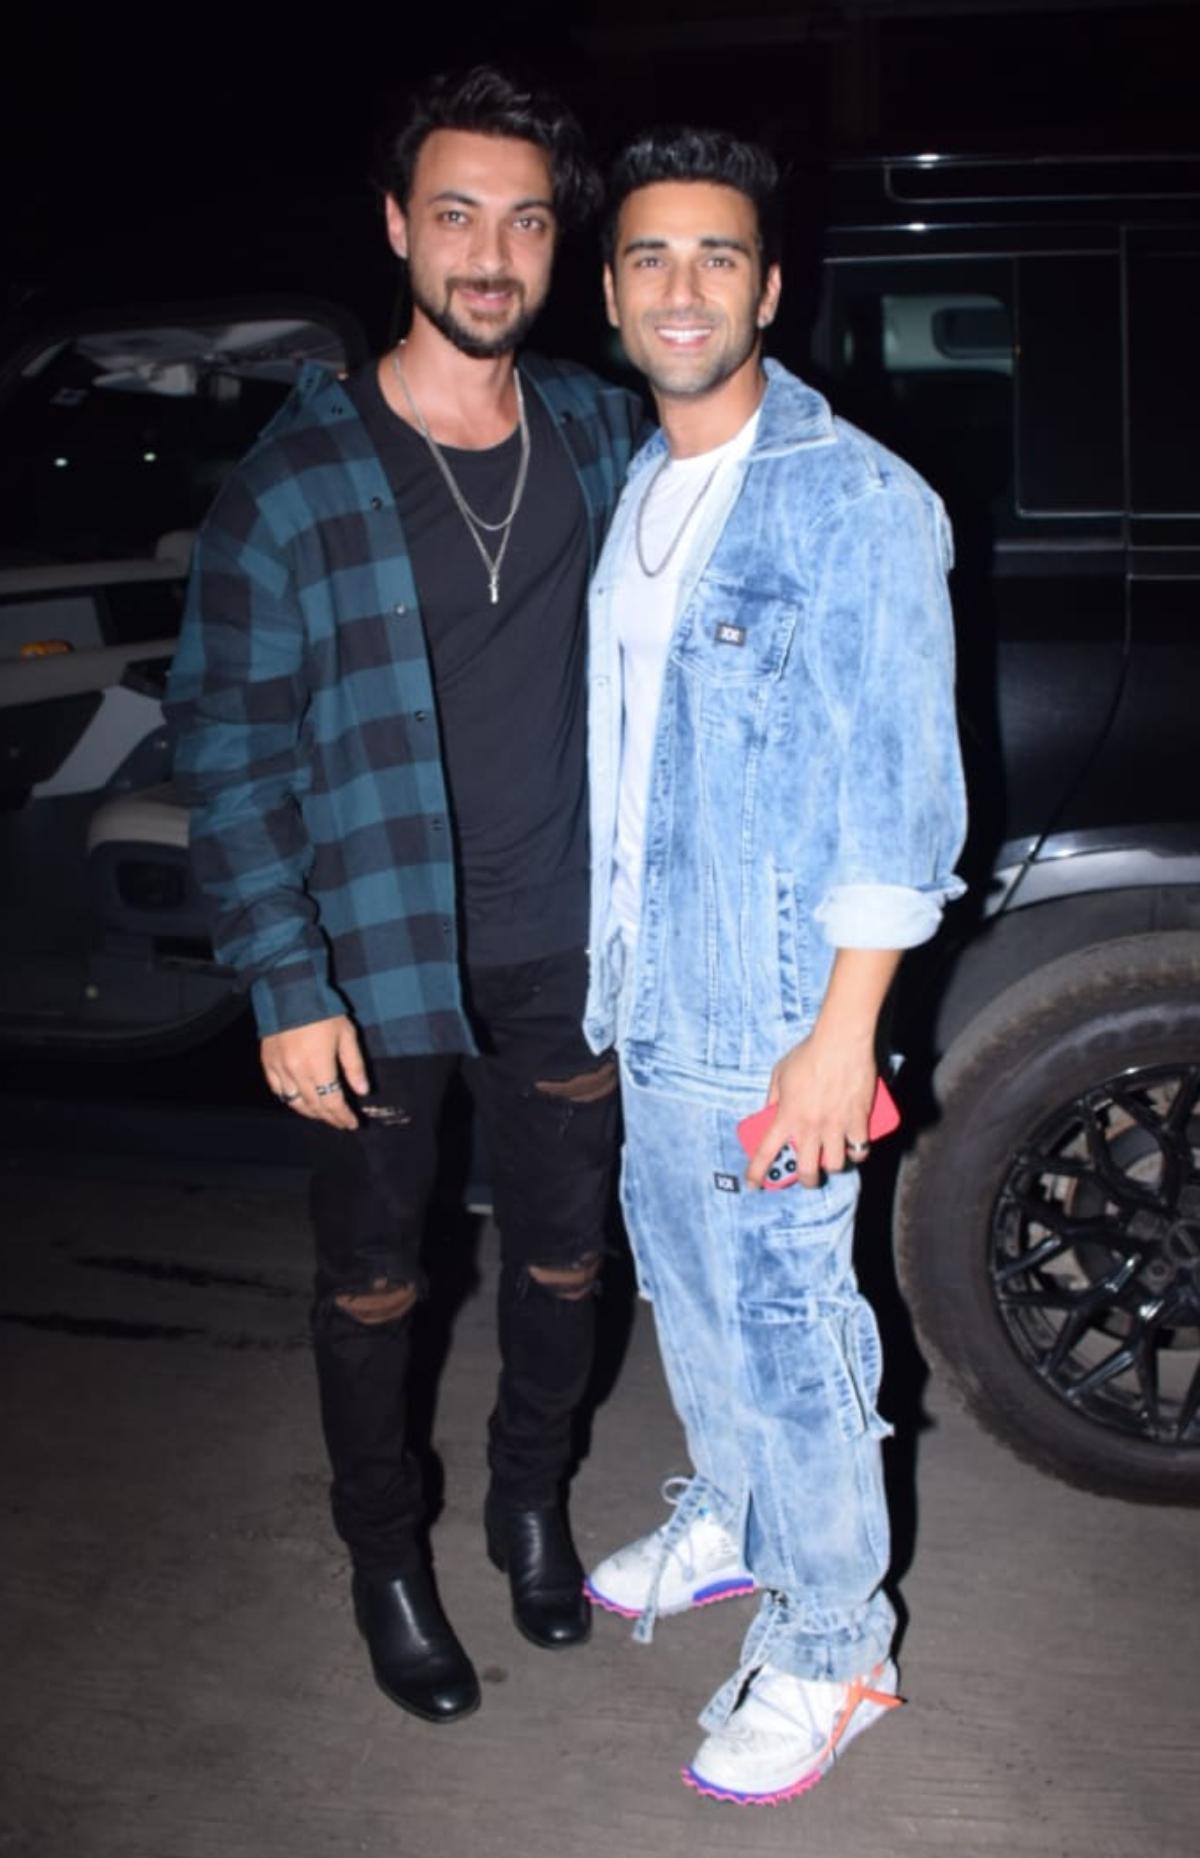 Aayush Sharma who was last seen in 'Antim' arrived at the party with his wife Arpita Khan and posed with Varun Sharma's 'Fukrey' co-star, Pulkit Samrat. 